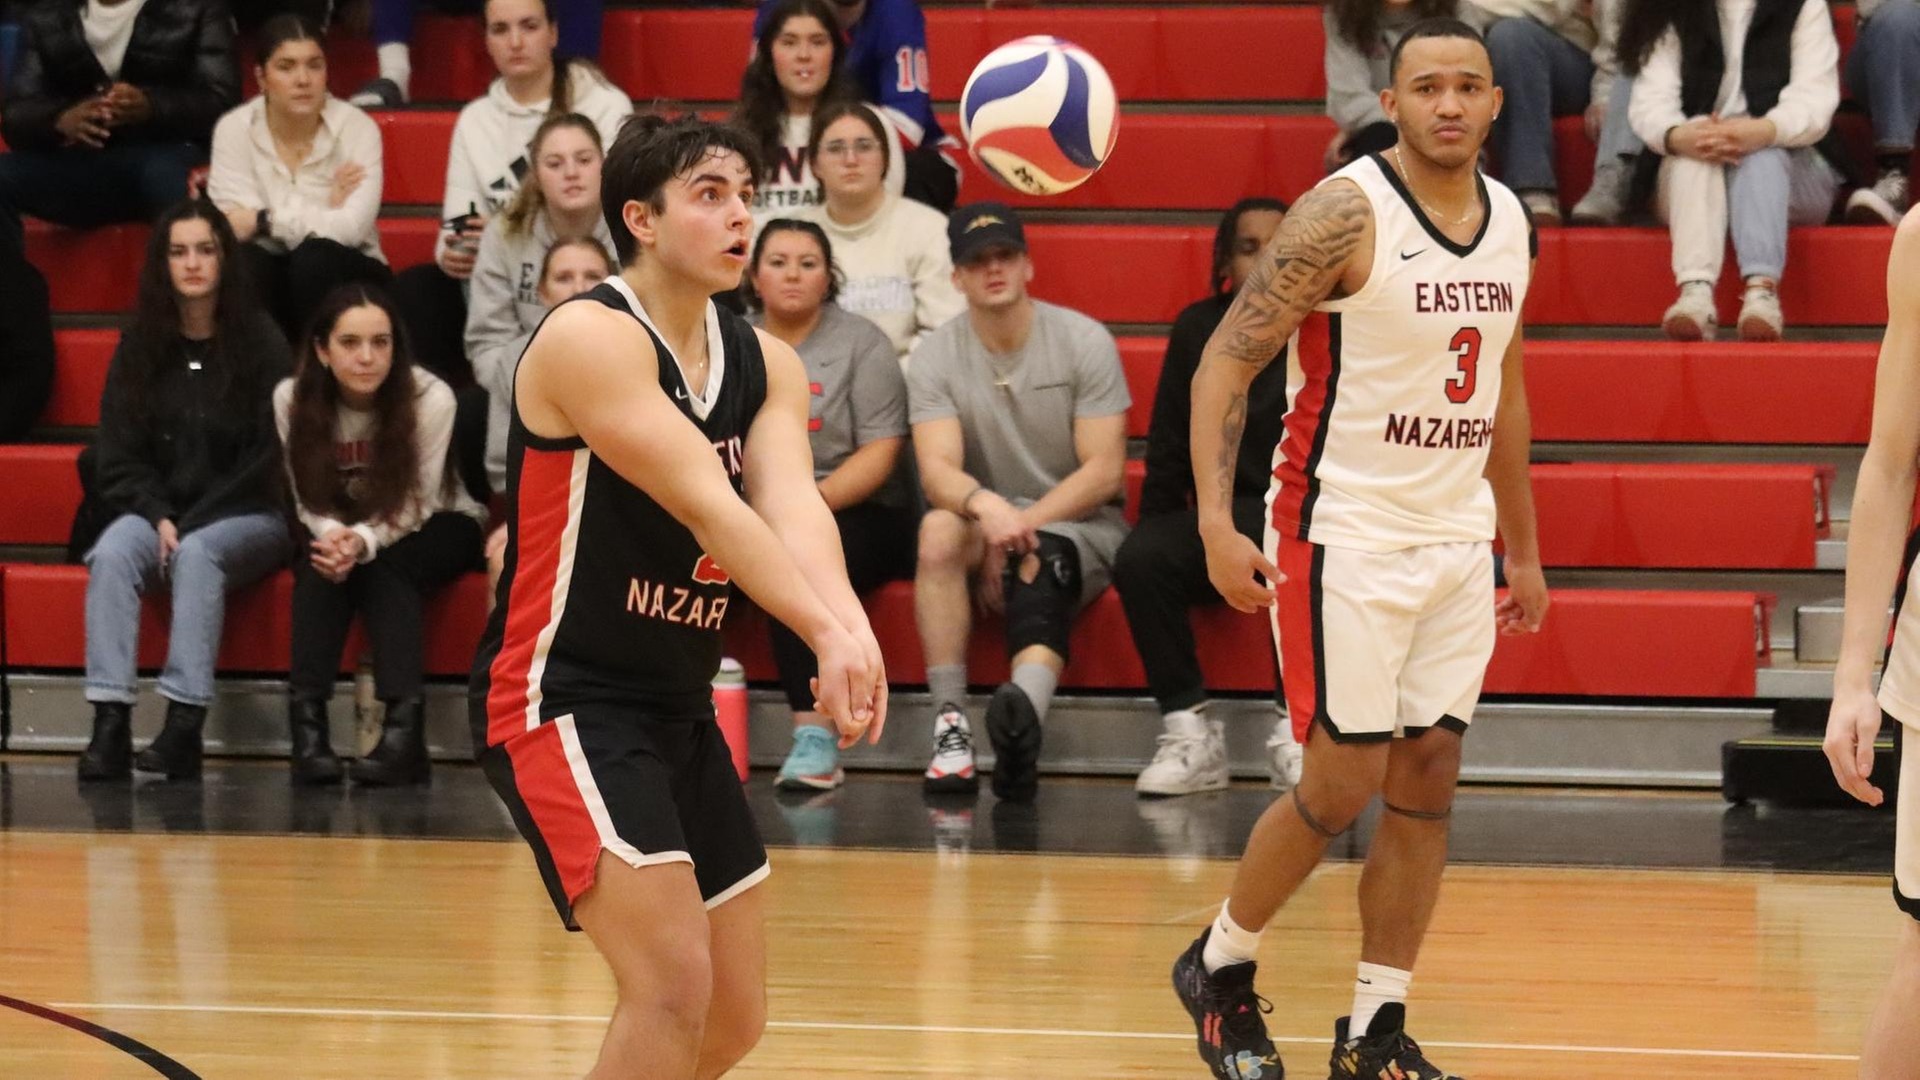 Men’s Volleyball Tripped Up at Rivier, 3-1